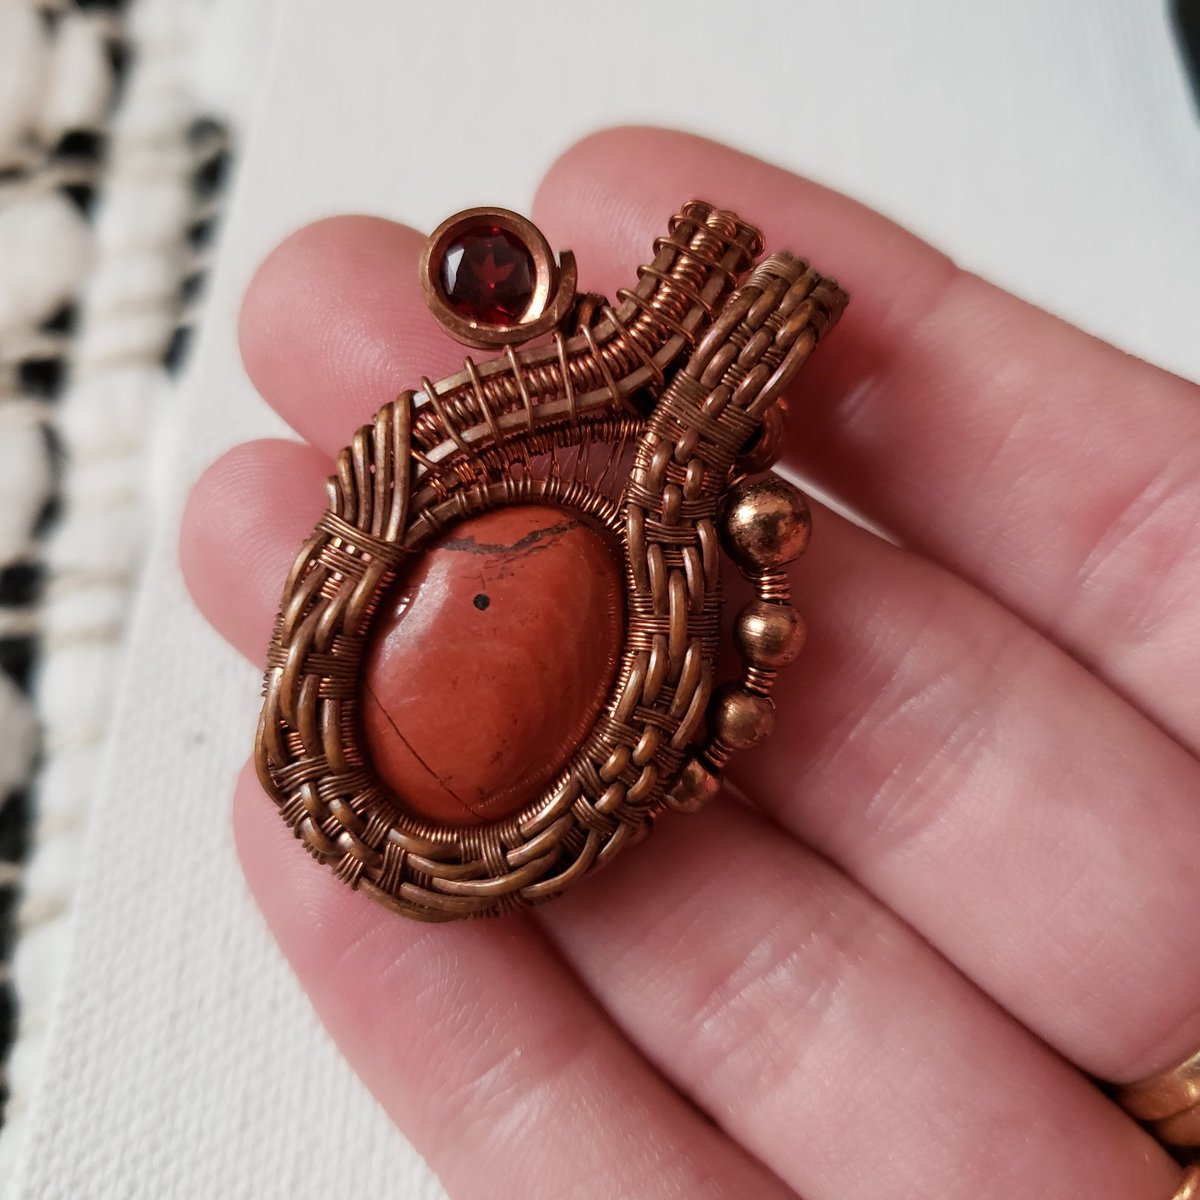 Red jasper and faceted garnet in copper - 45 free us shipping